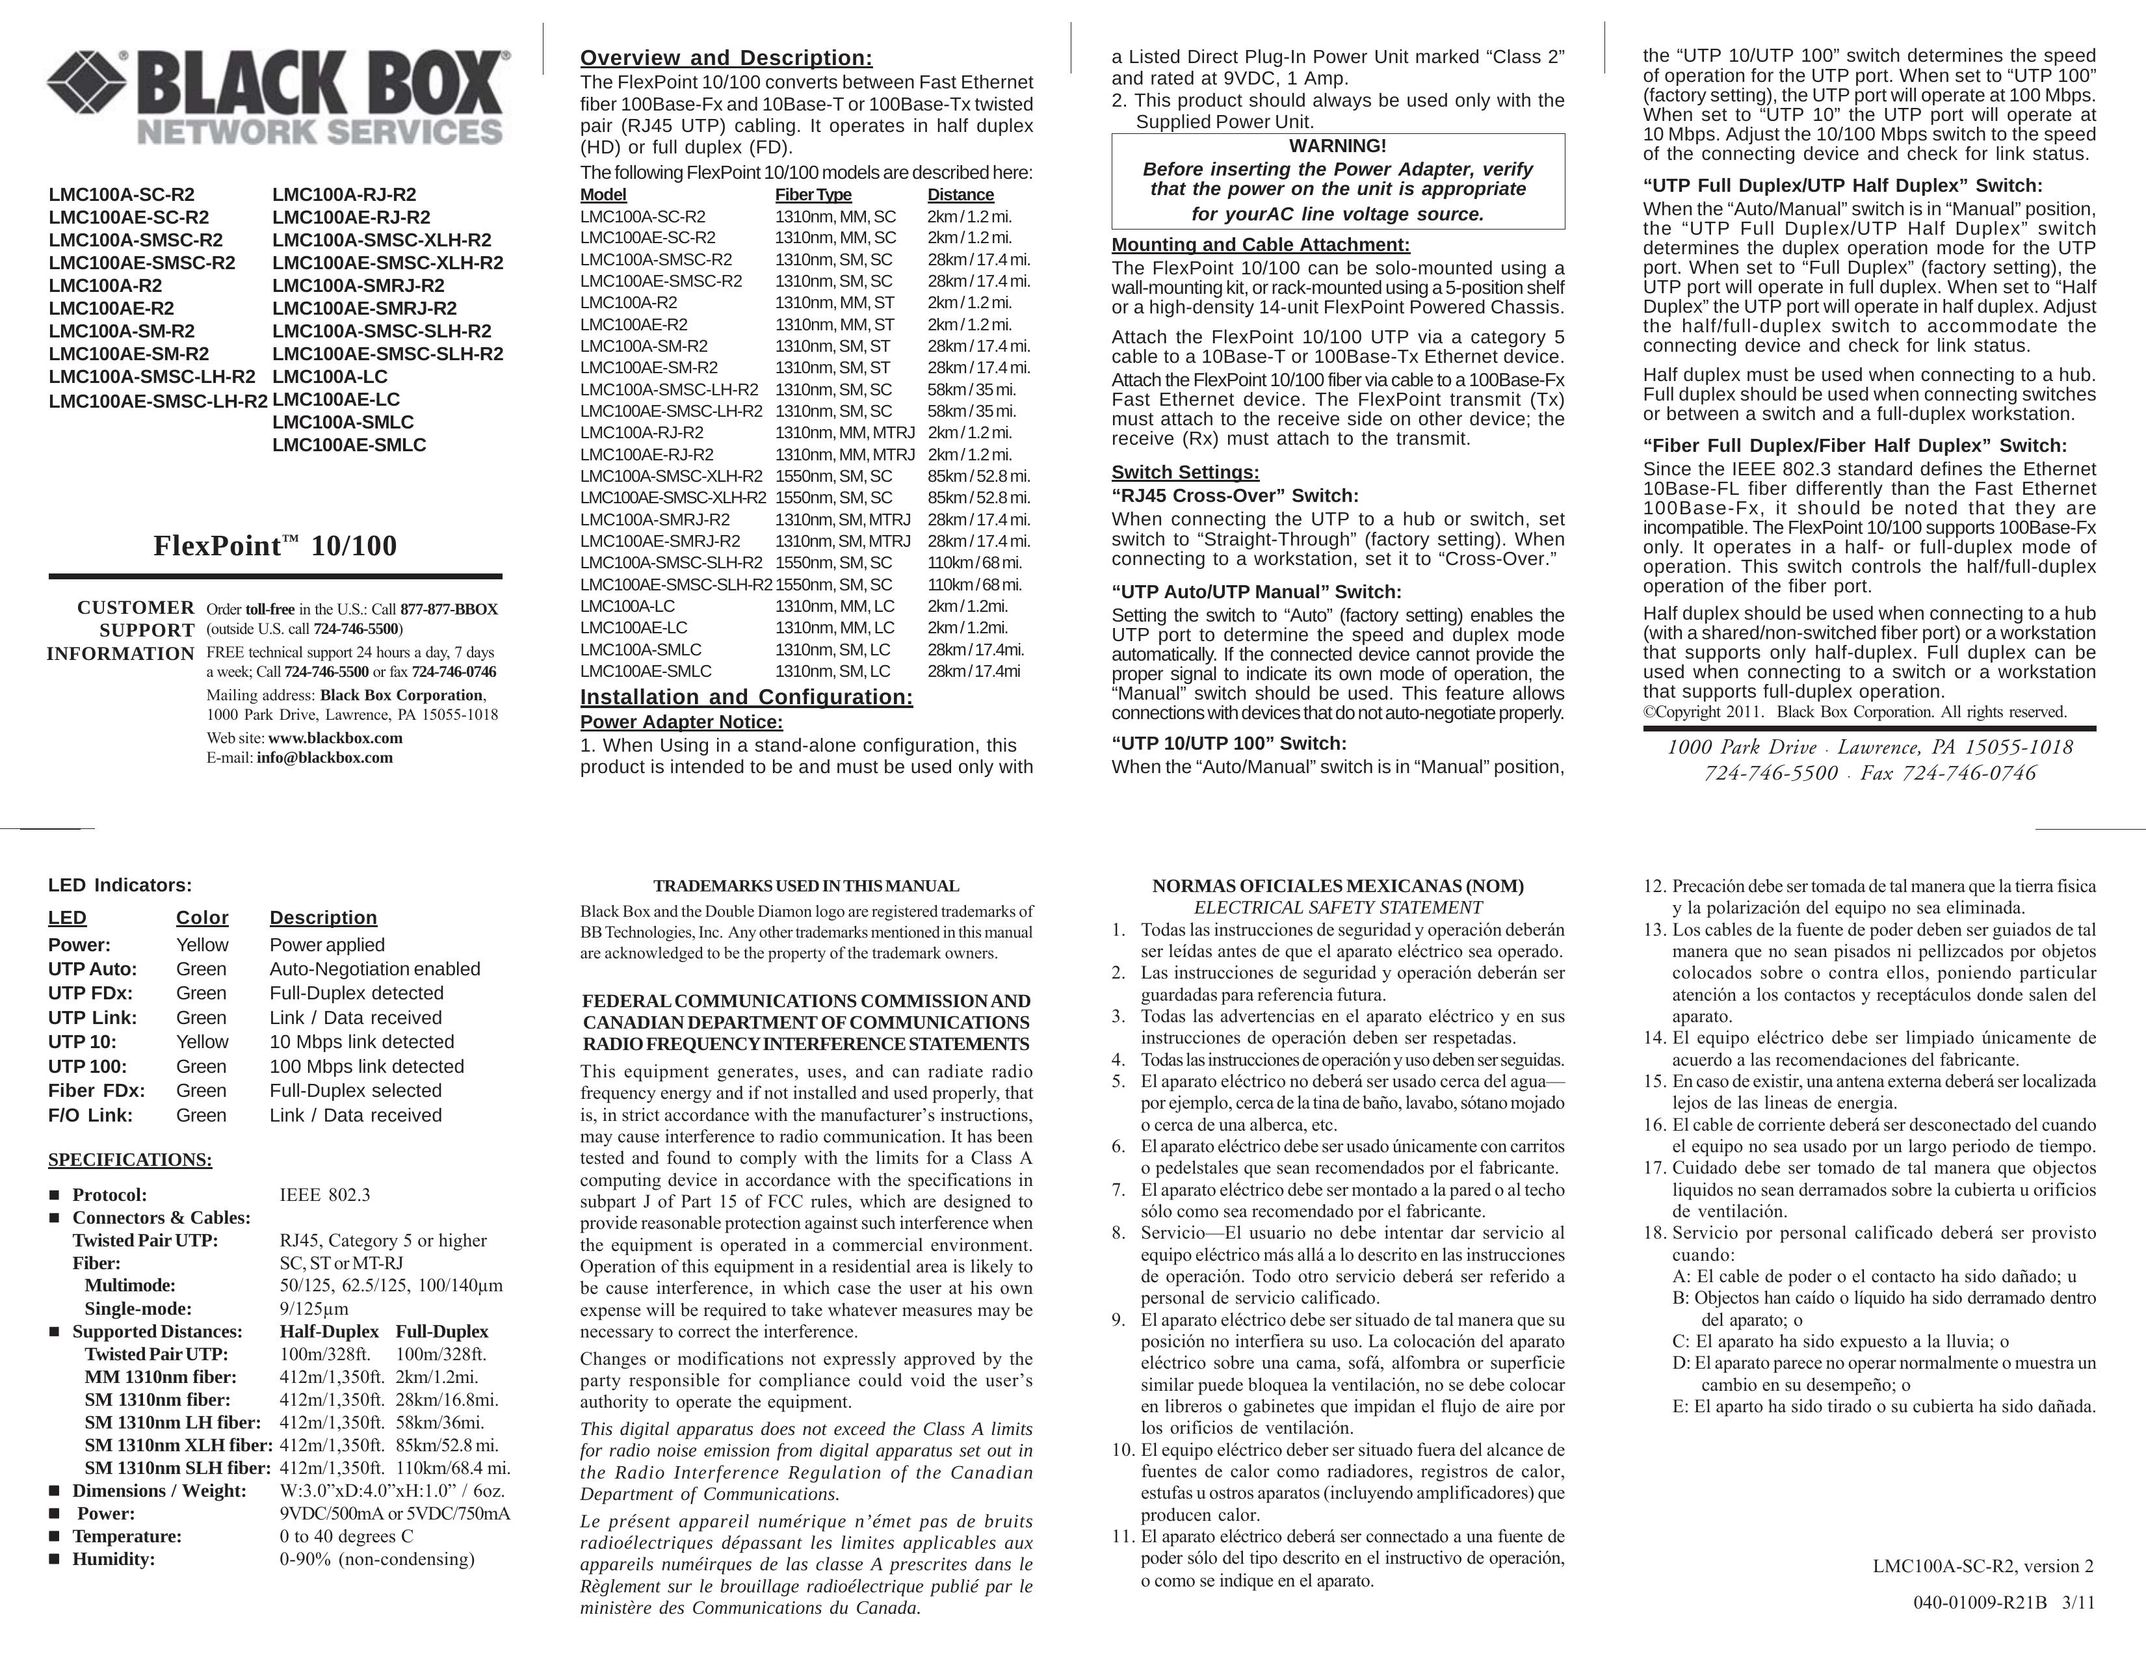 Black Box Flexpoint 10/100 Network Cables User Manual